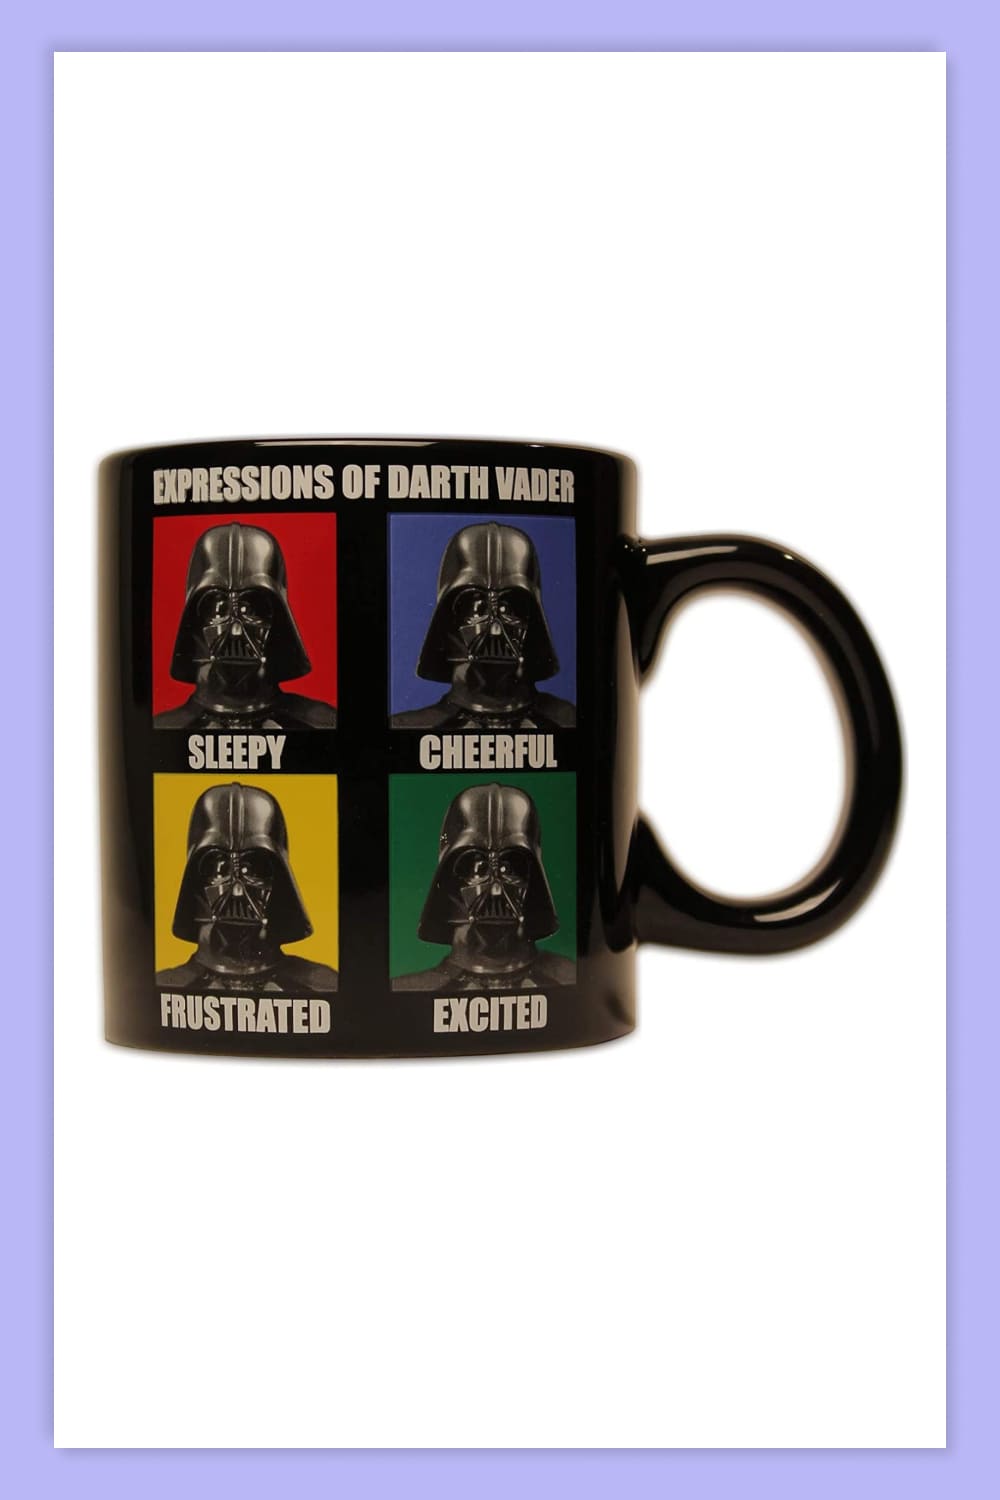 Black mug with images of Darth Vader on four colored backgrounds.